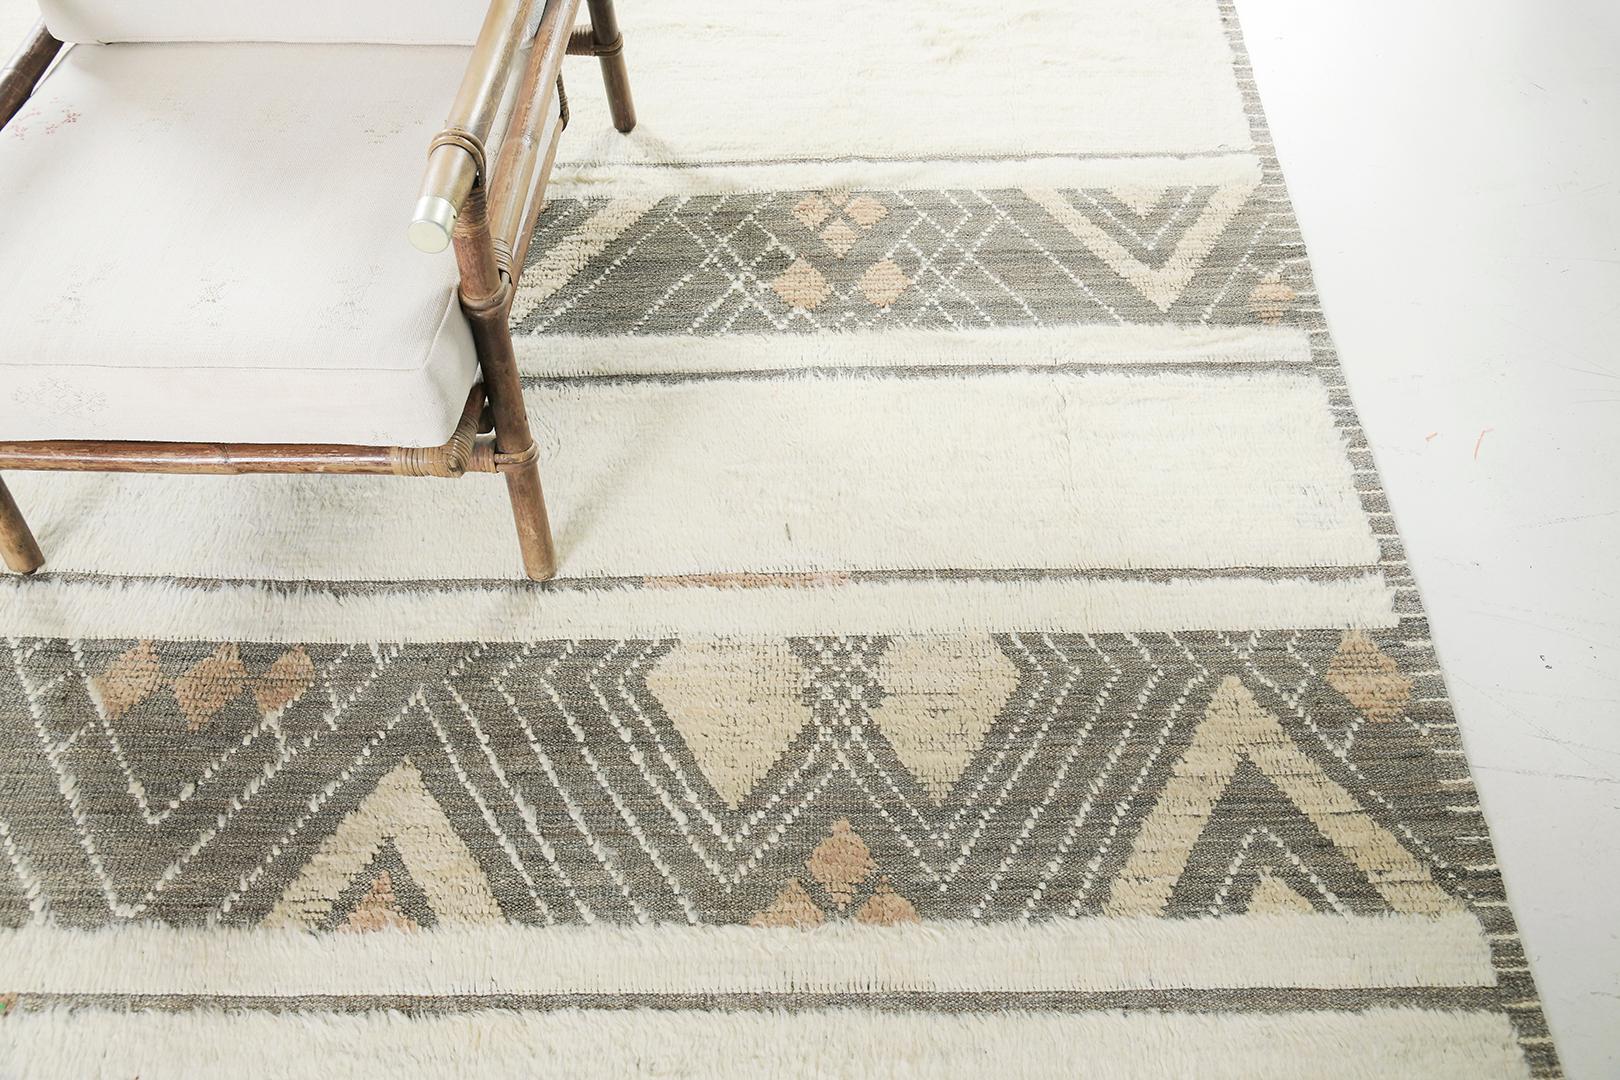 Distinct and preppy, Sufian’ features a variation of coordinated lozenges that creates an interesting illusion of fascinating harmony accentuated with ivory strips. Tastefully classic with a sophisticated twist, this exhilarating rug is a perfect